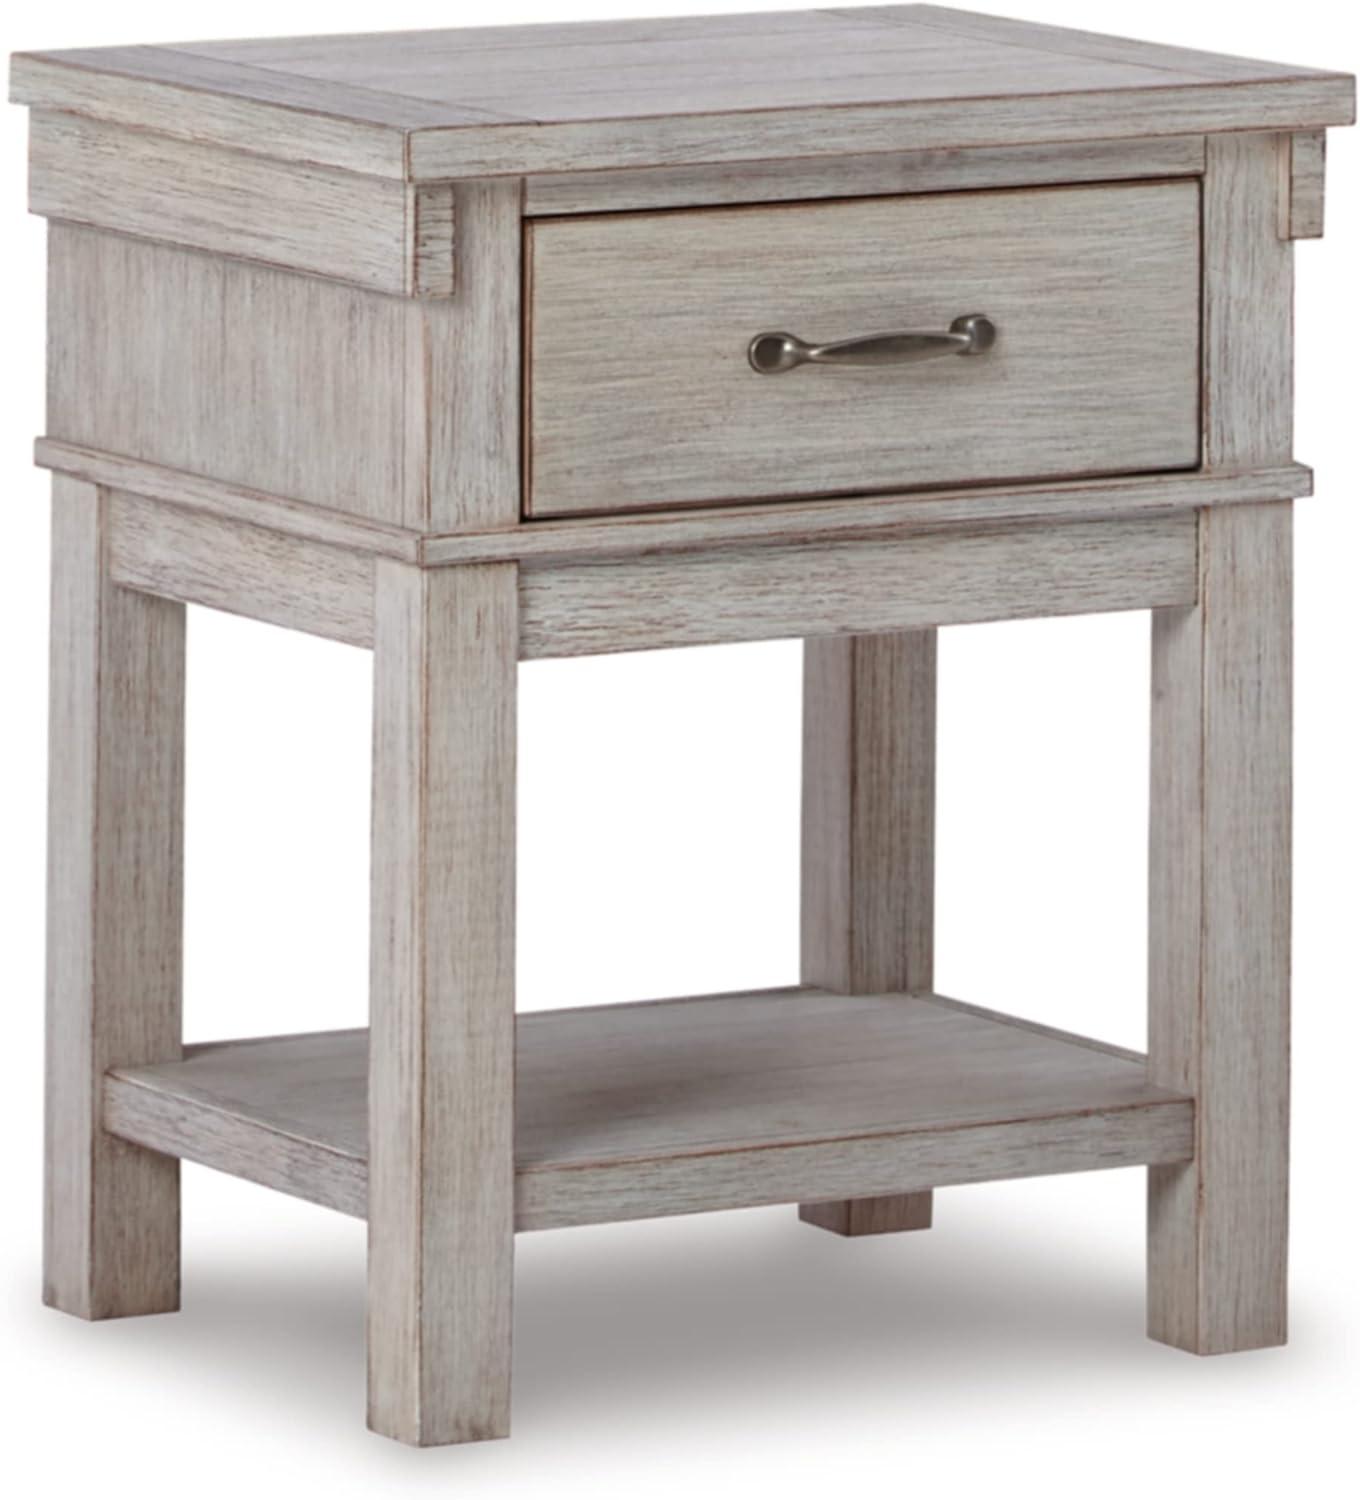 Transitional Beige 1-Drawer Nightstand with Brushed Nickel-Tone Handle